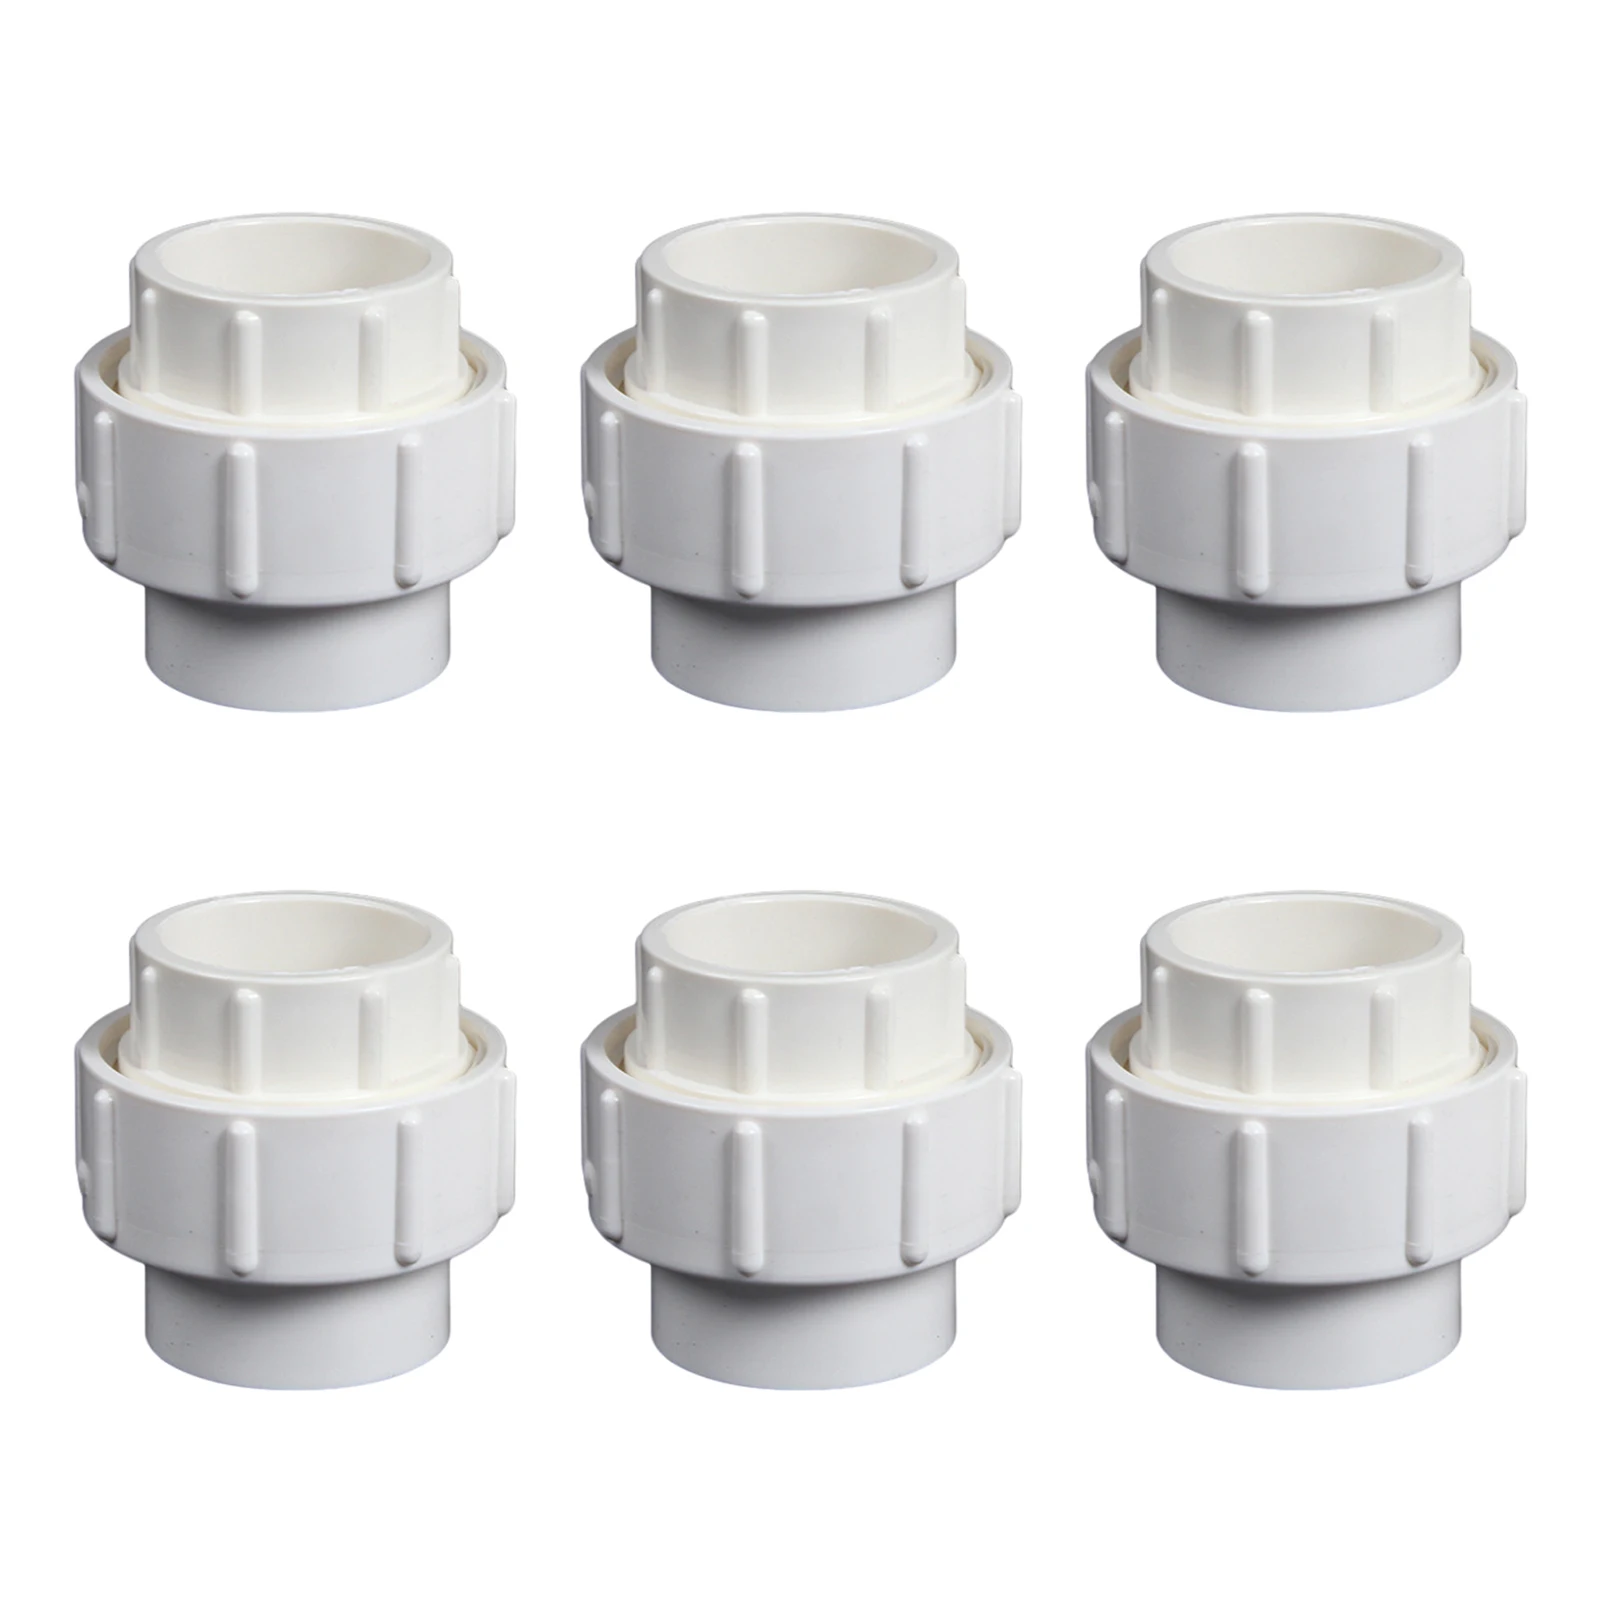 

6pcs Applications Port Garden Convenient Socket Outdoor Coupling Pipe Fitting Swimming Pools Slip Union Plumbing PVC Adapter